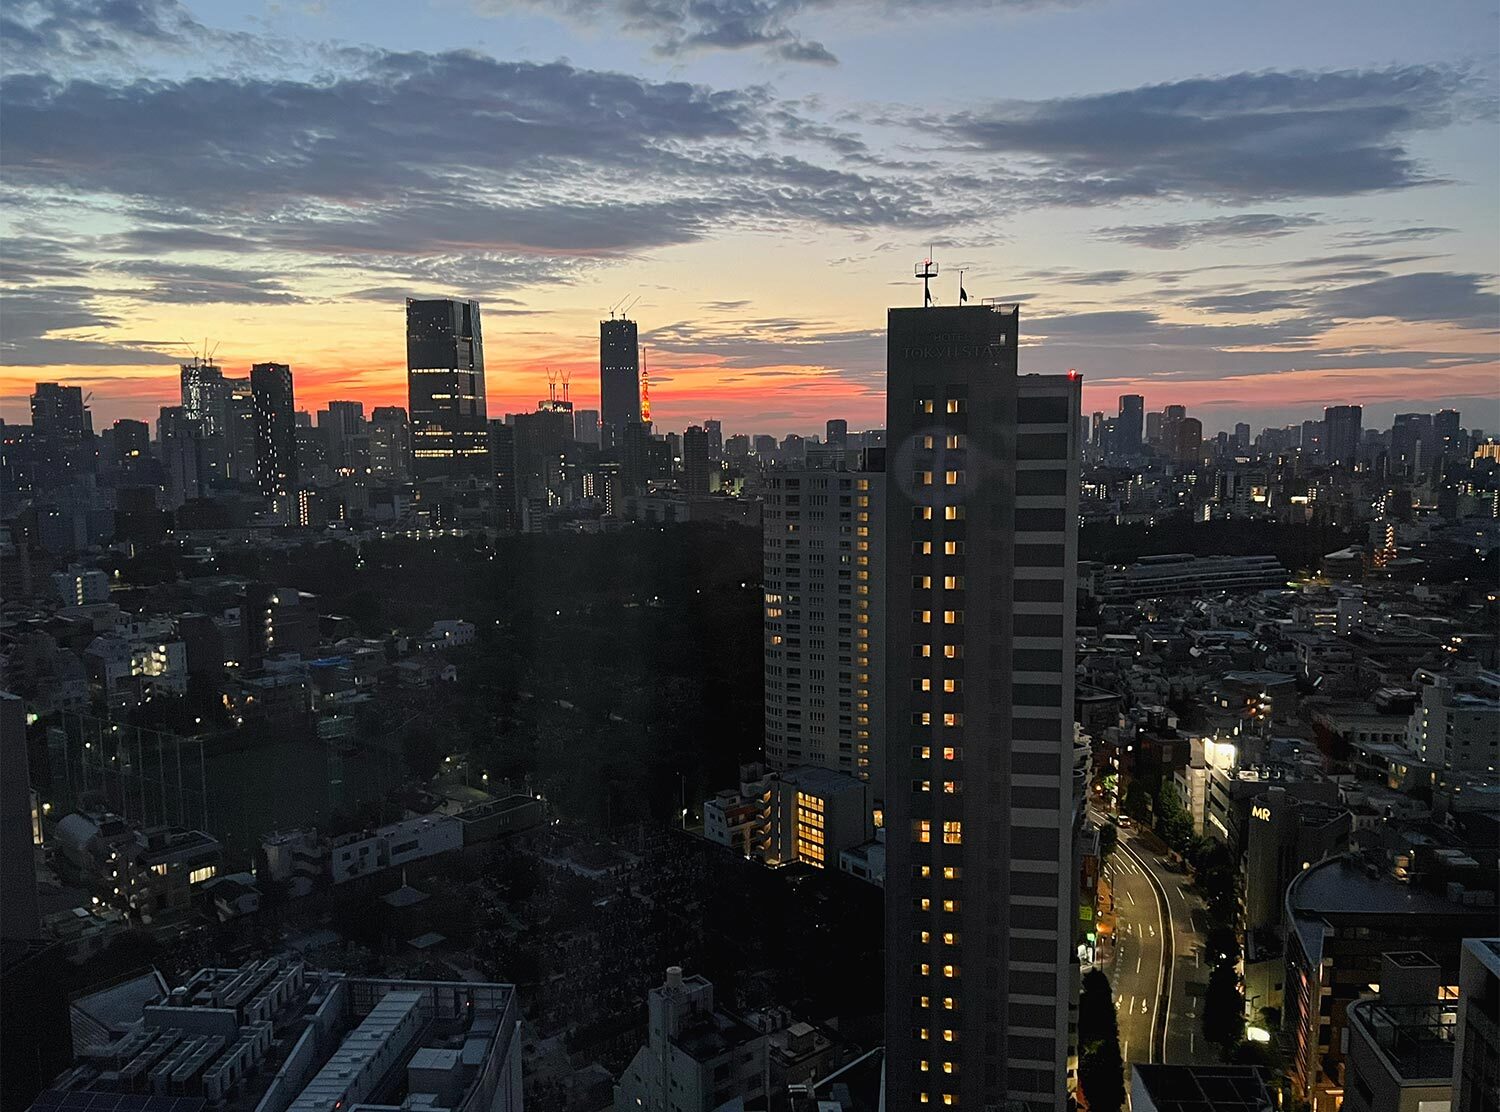 The Aoyama Grand Hotel The good thing about jet lag is that you get to see many sunrises